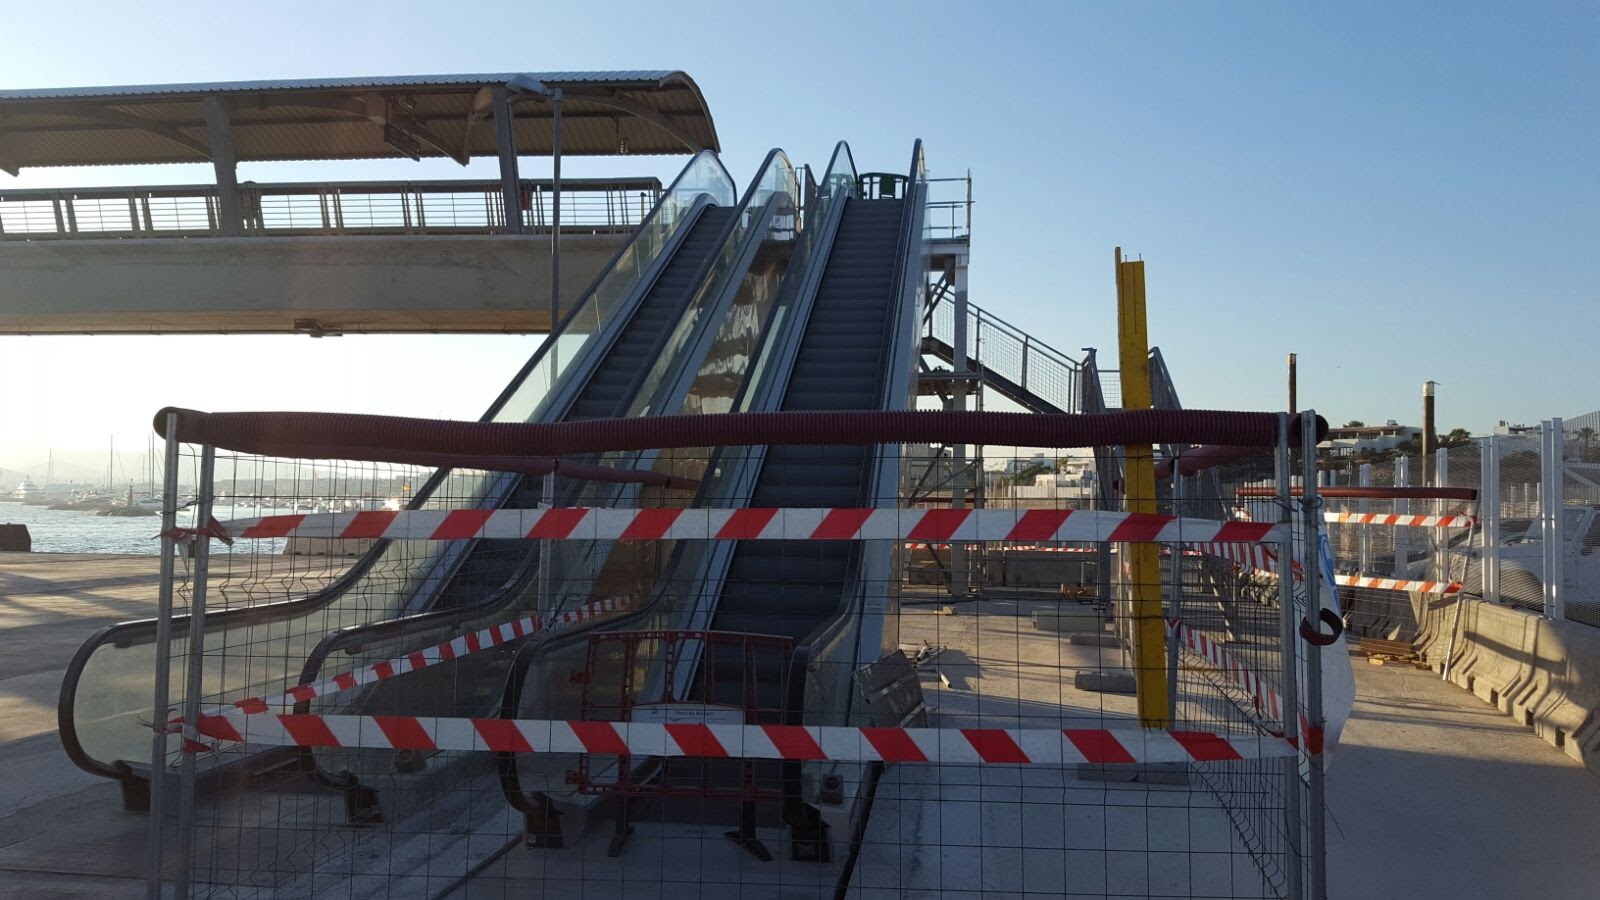 More escalators and lifts will improve the safety of Botafoc dock 